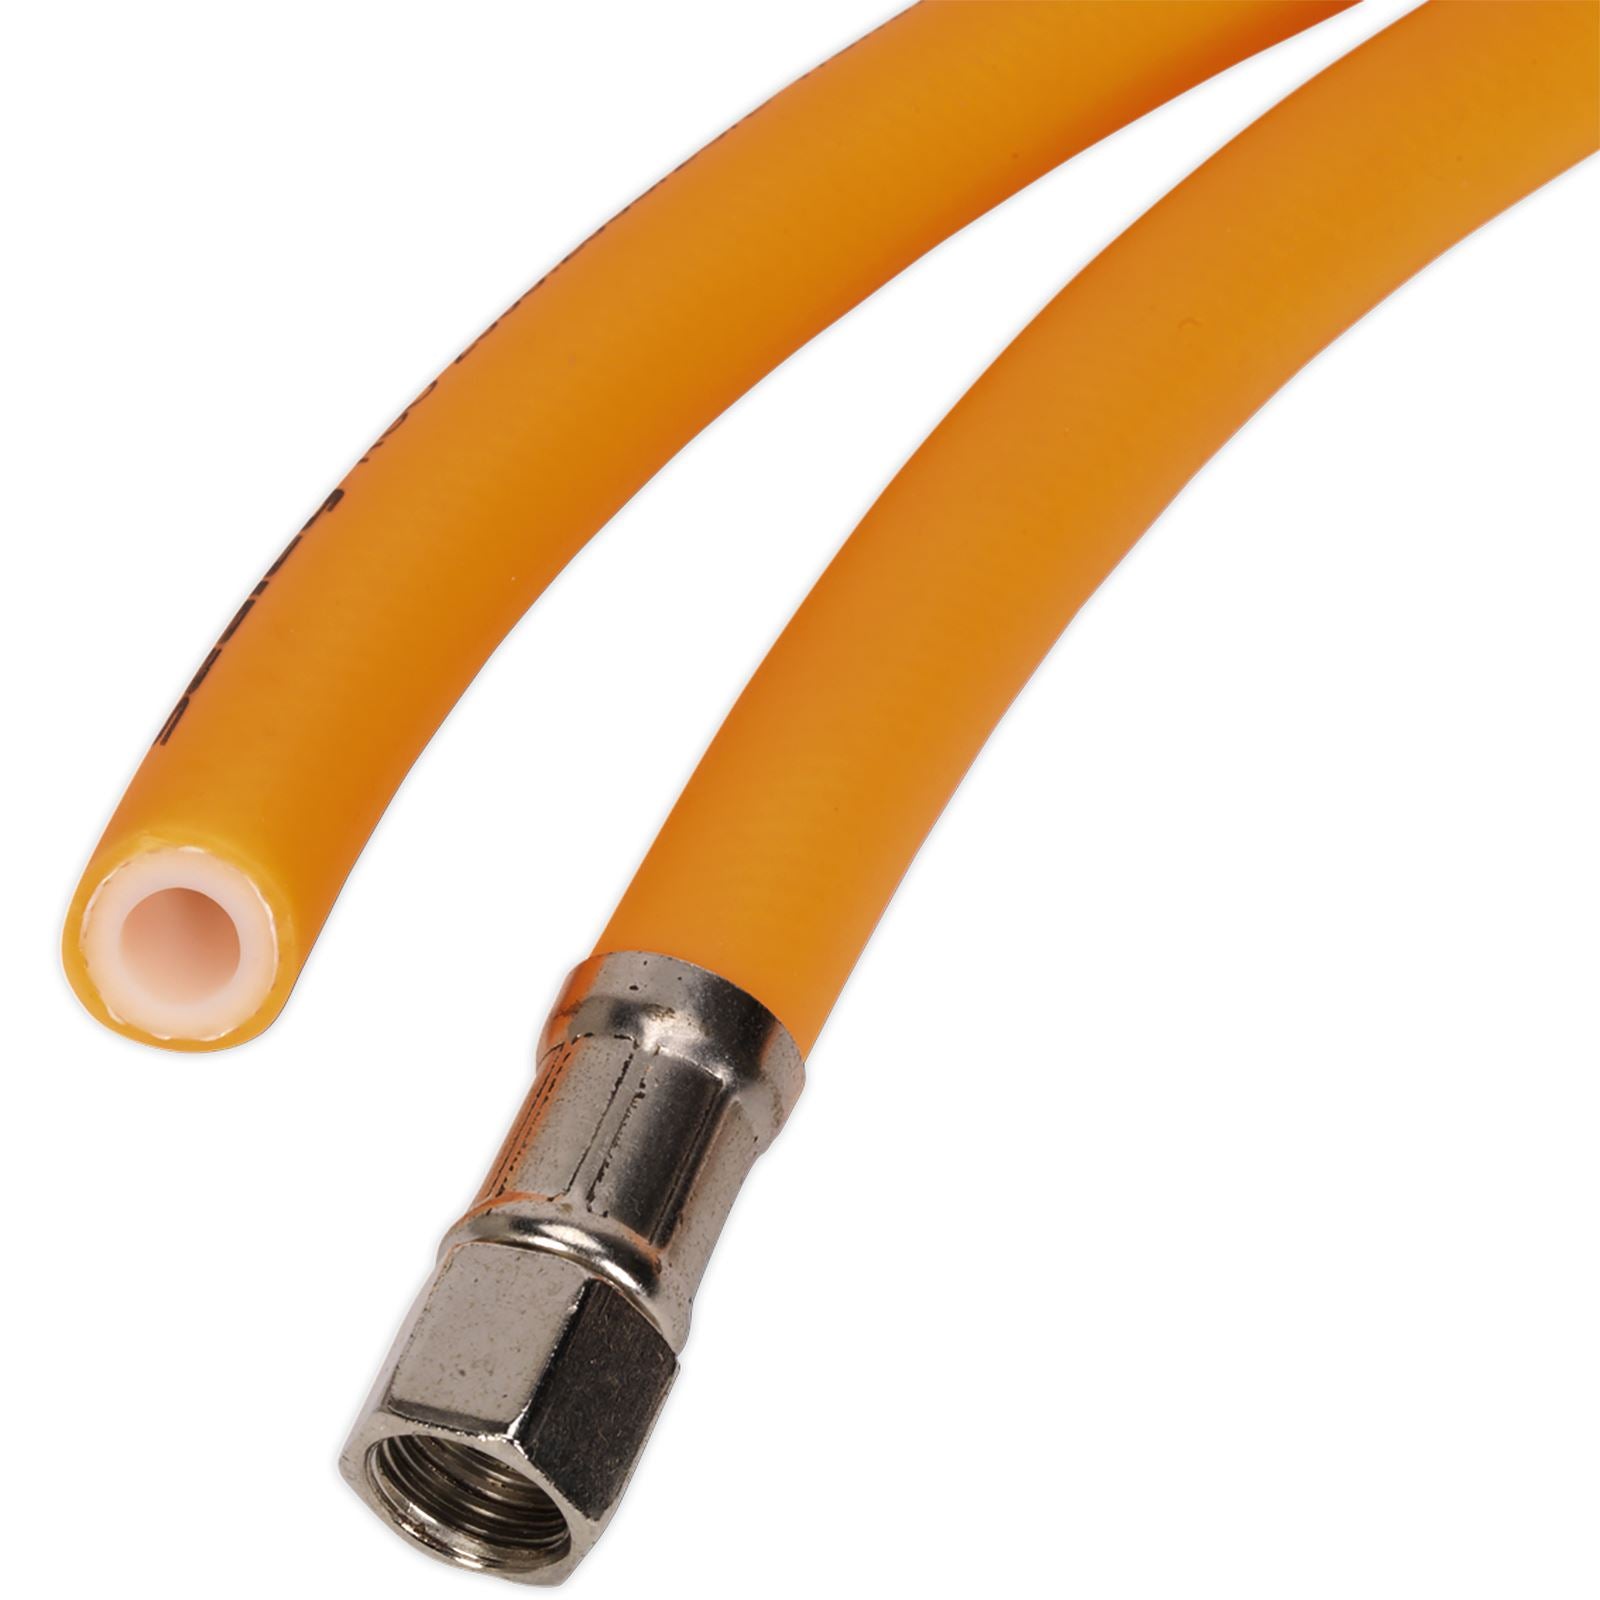 Sealey 10m x Ø10mm Hybrid High Visibility Air Hose with 1/4" BSP Unions